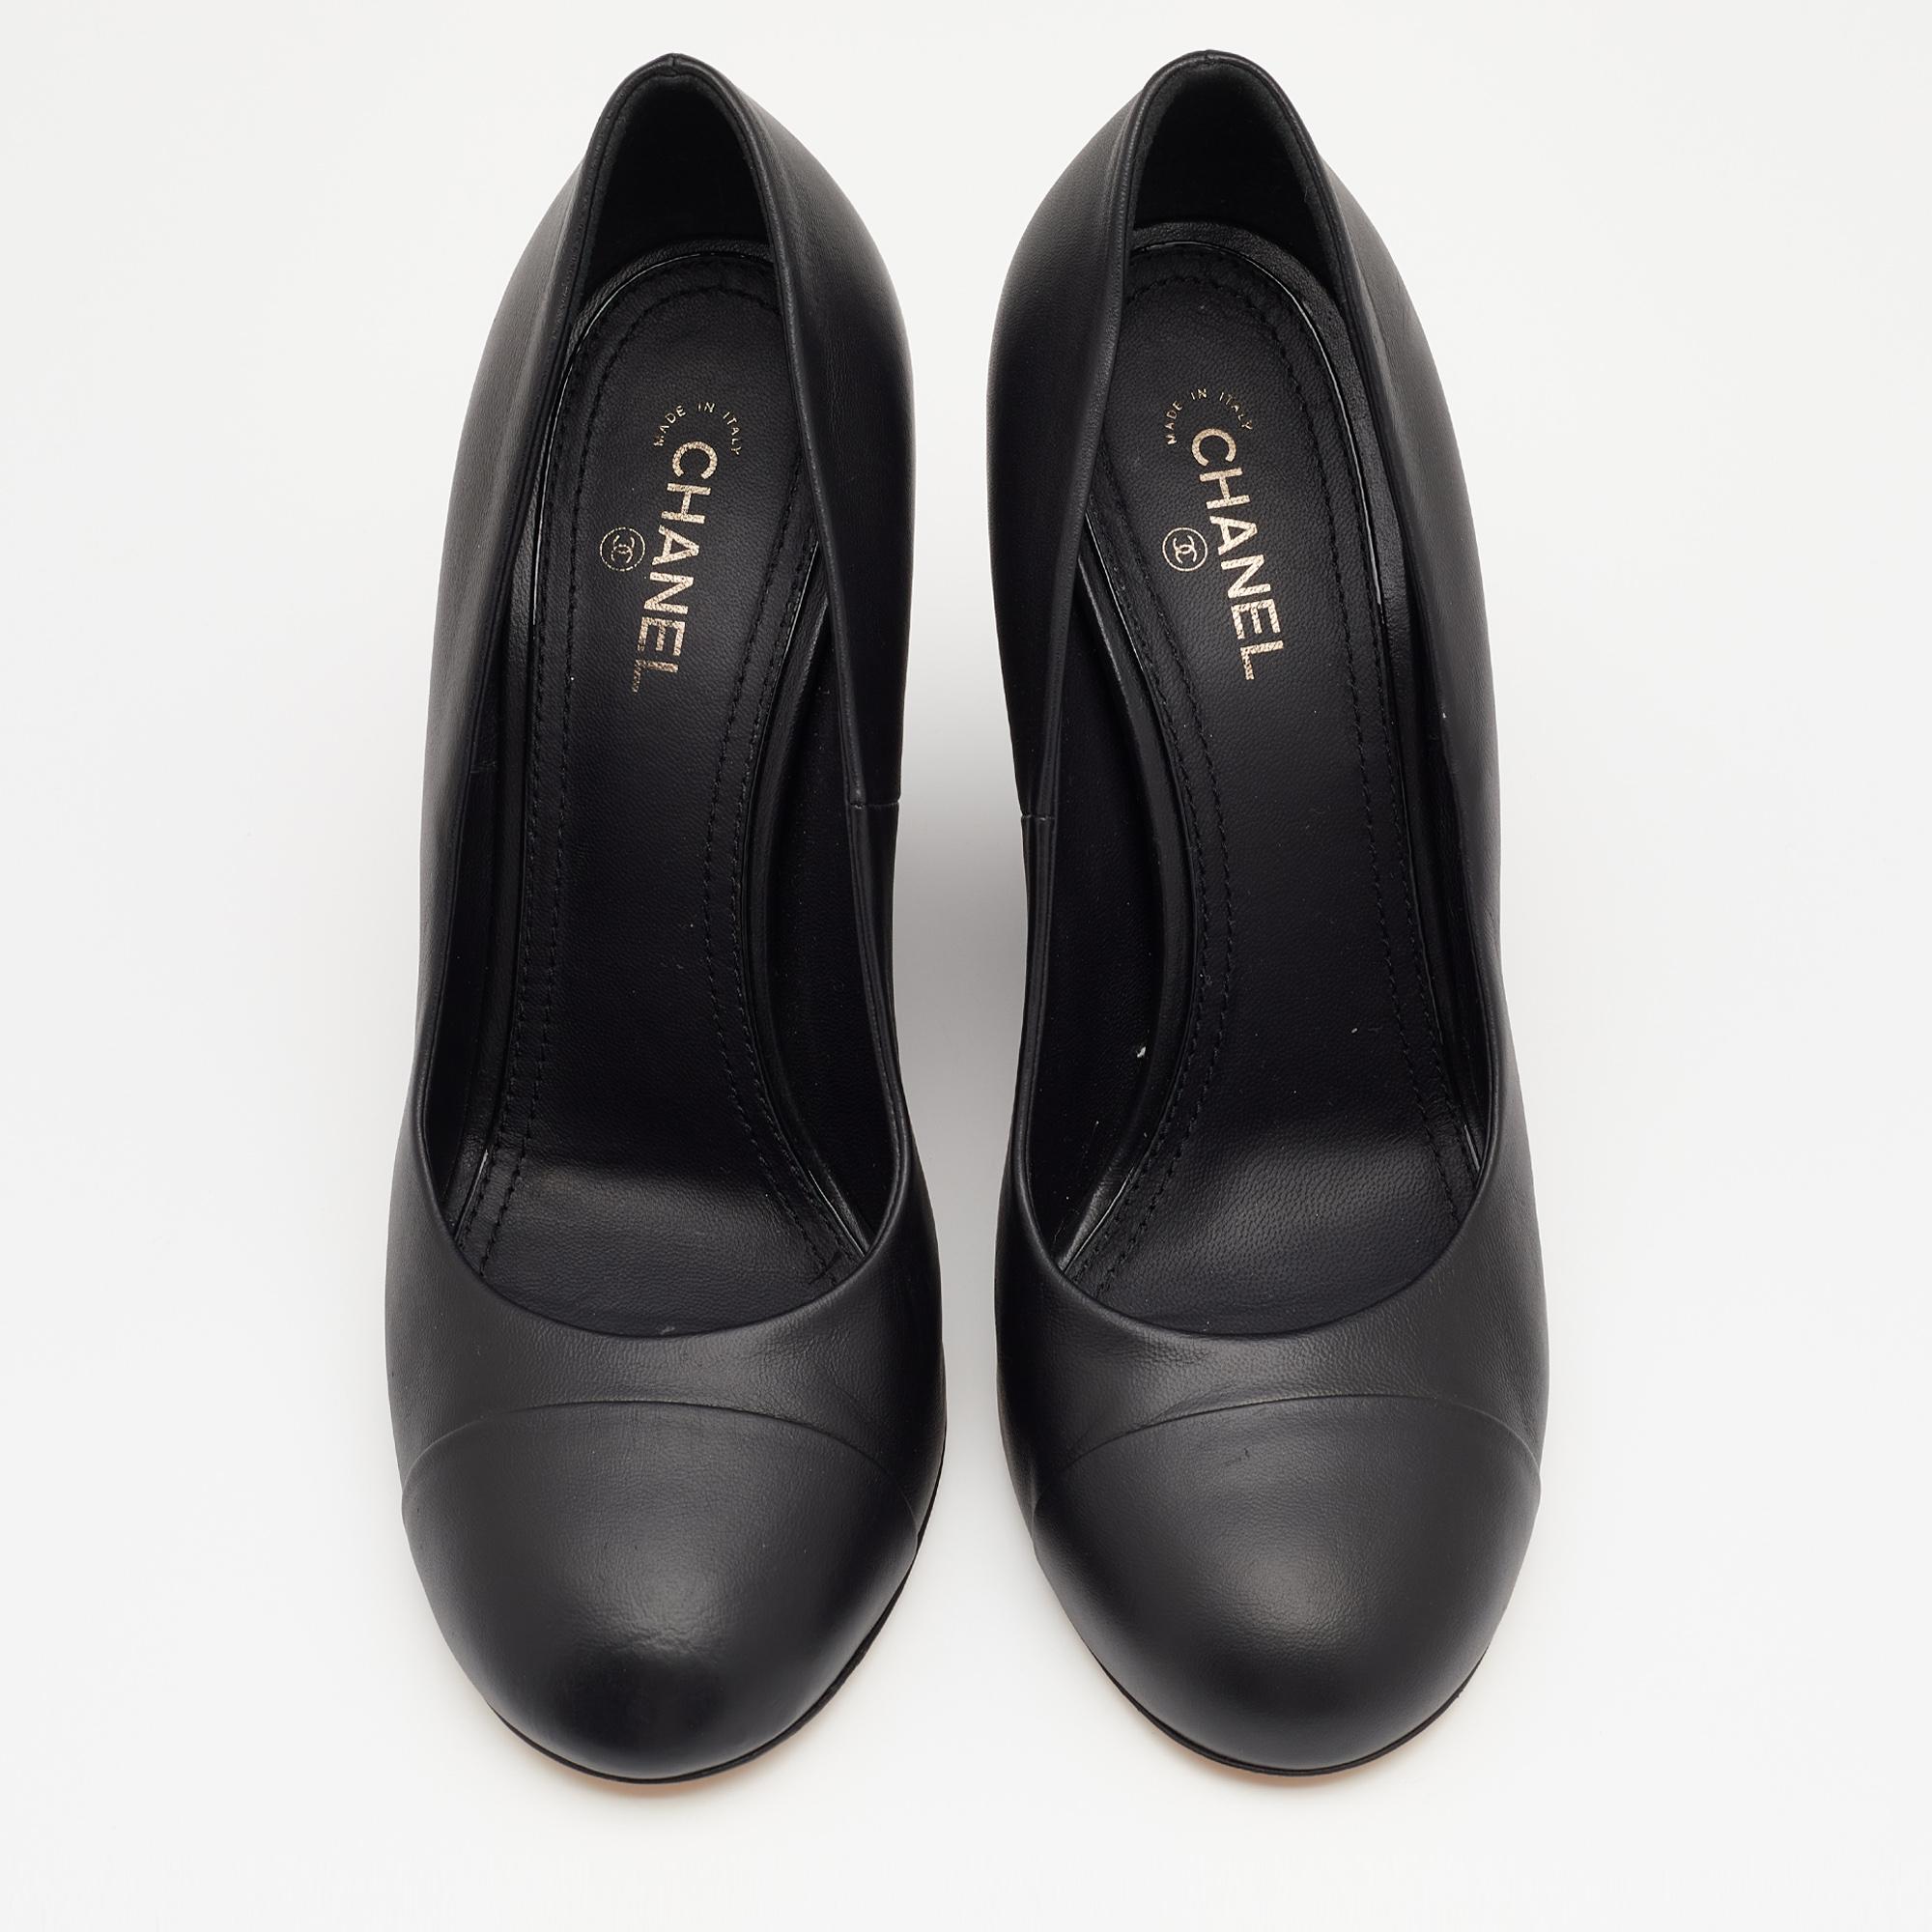 Walk stylishly in these classy pumps from the House of Chanel. Designed using black leather on the exterior, these pumps display wedge heels and rounded cap toes. They are finished with a slip-on style for ease. Match them with your formal dresses